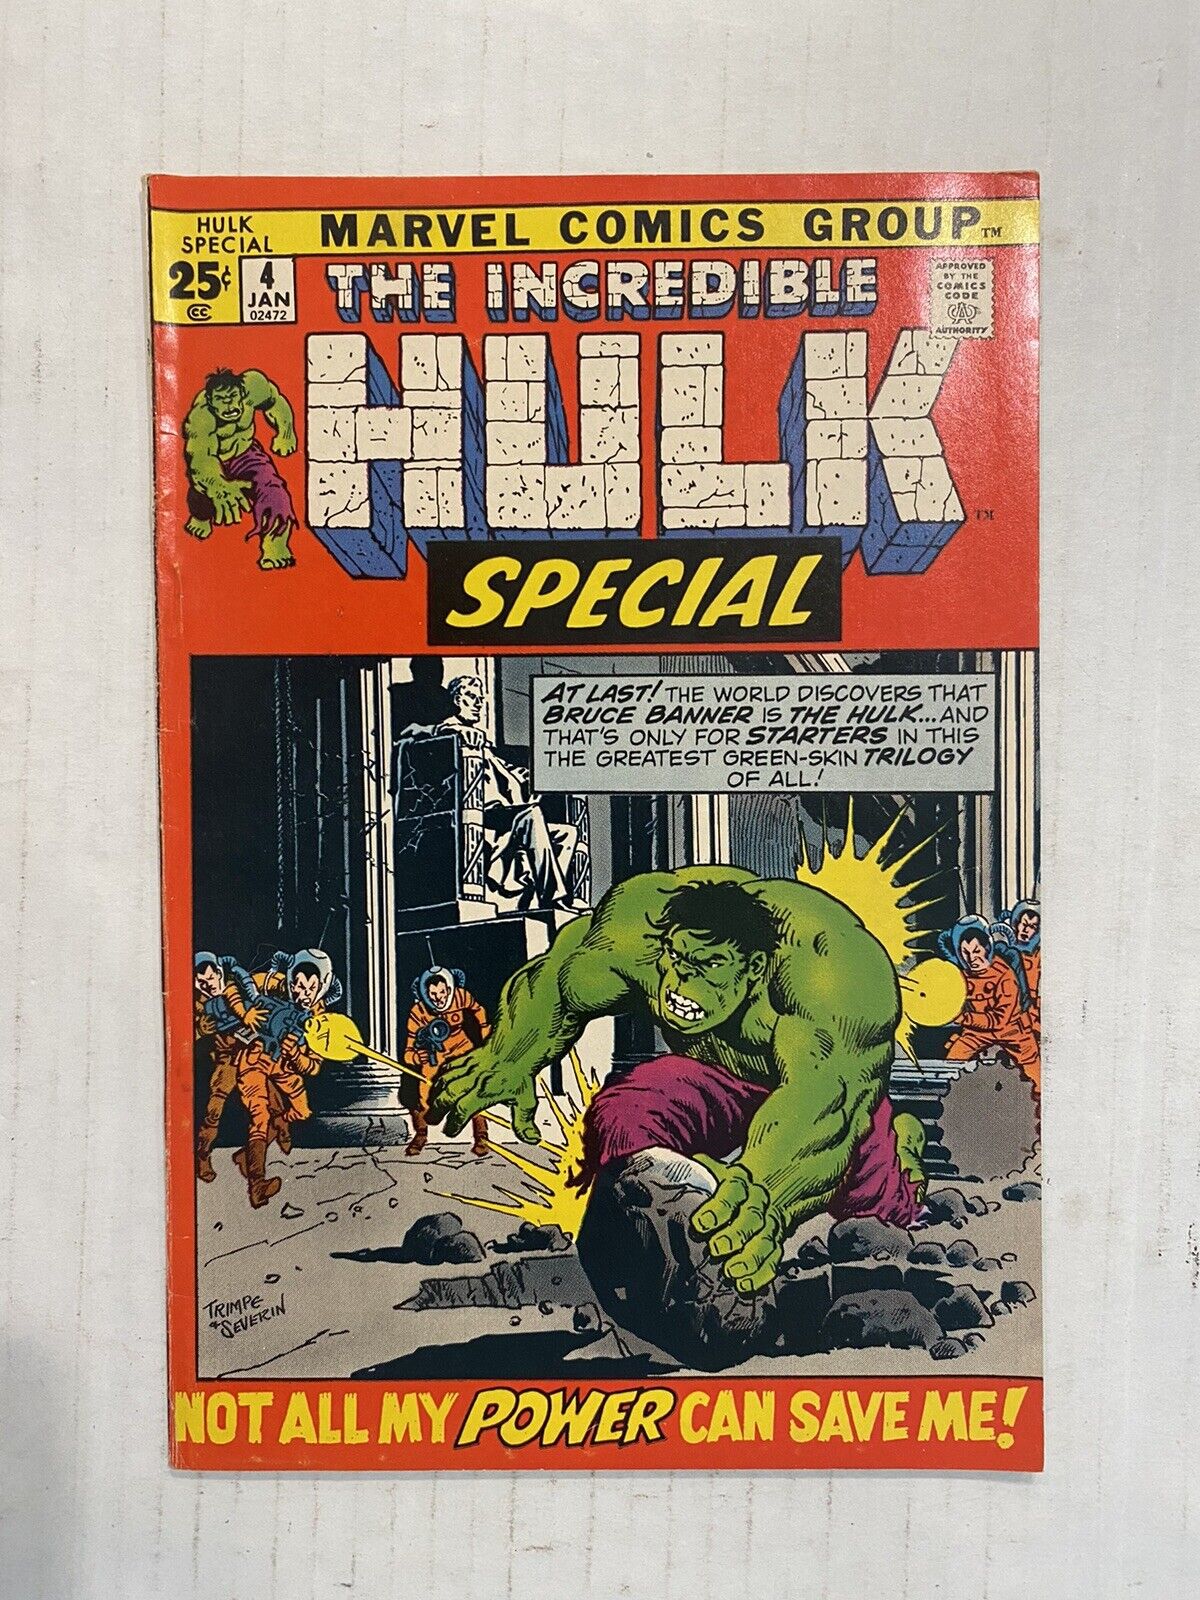 The Incredible Hulk Special #4 (1972 Marvel Comics) Bronze-Age Jack Kirby